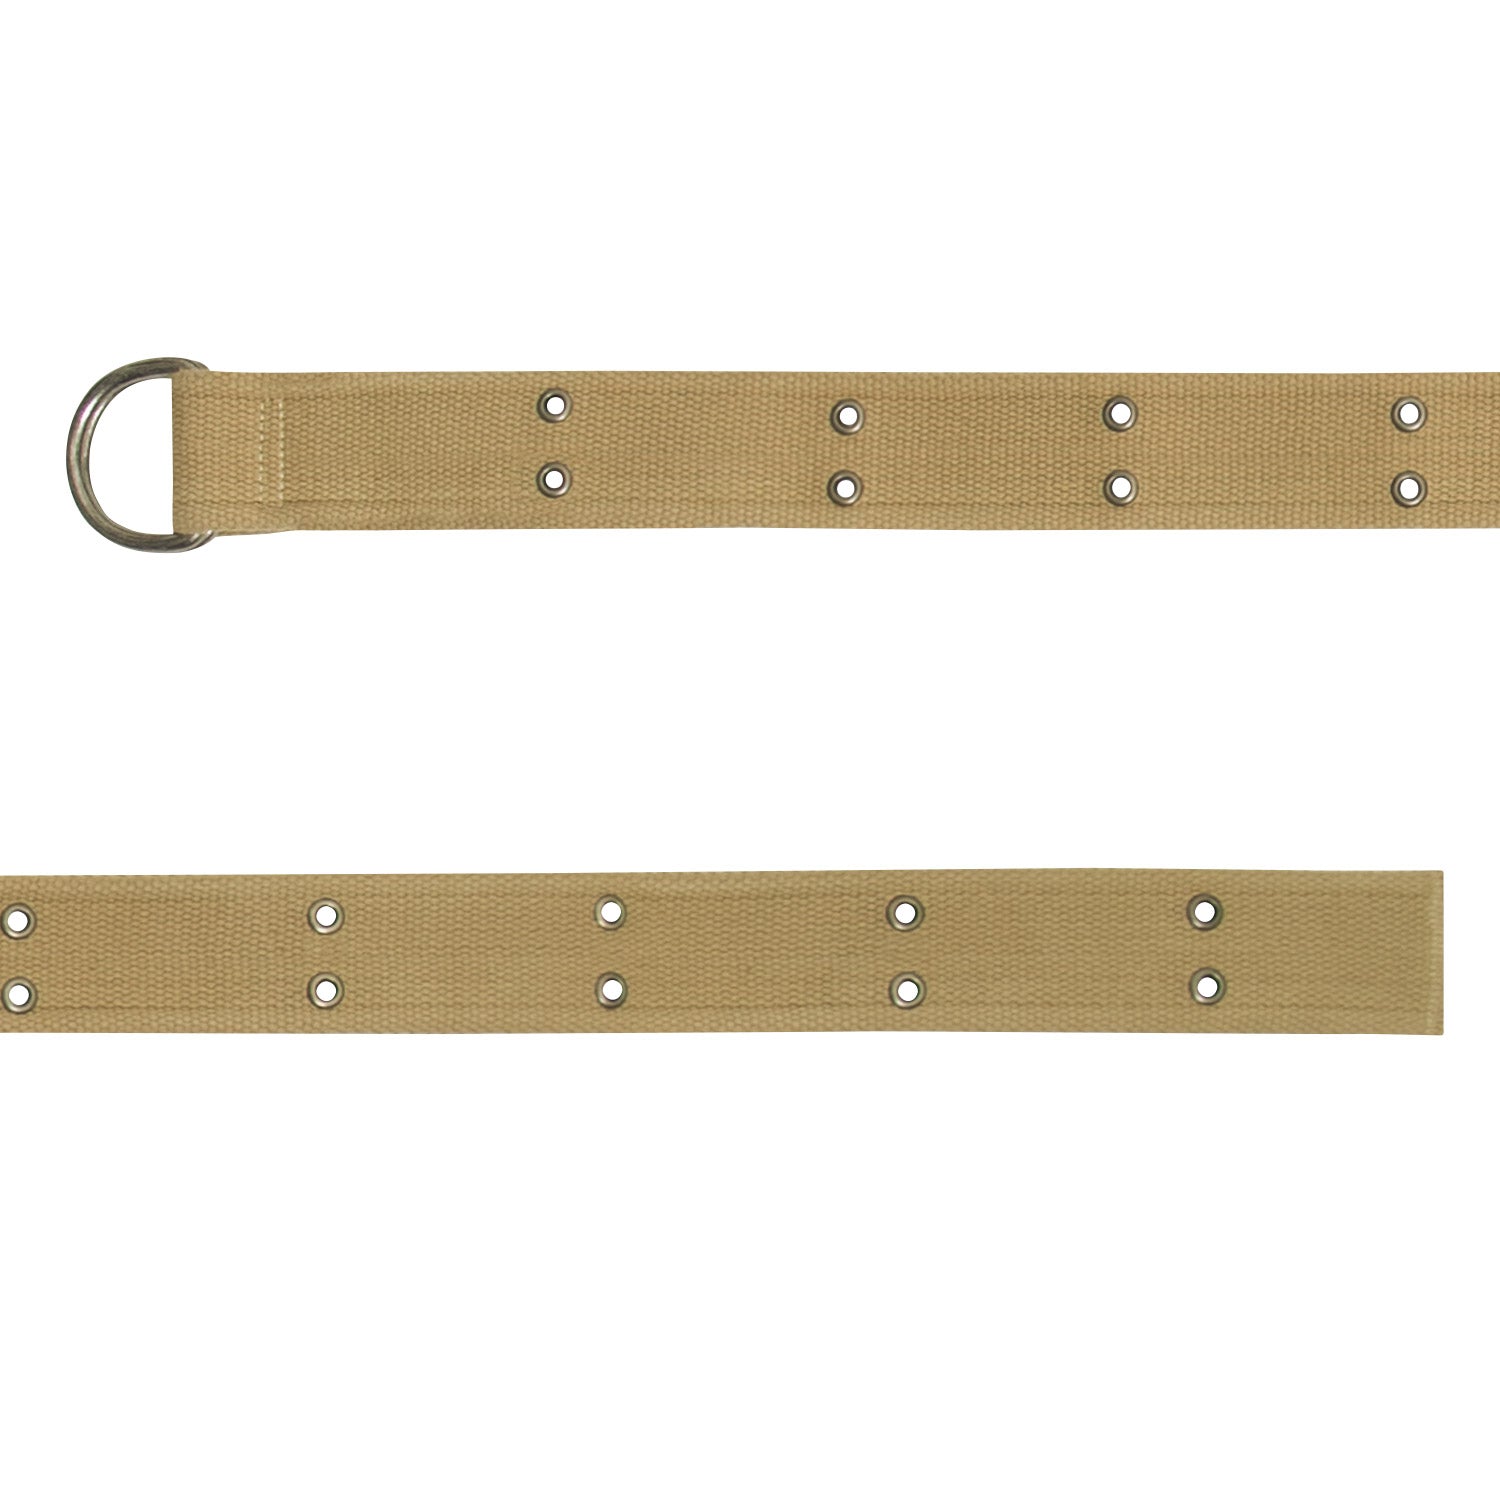 Rothco Vintage D-Ring Belts - Tactical Choice Plus